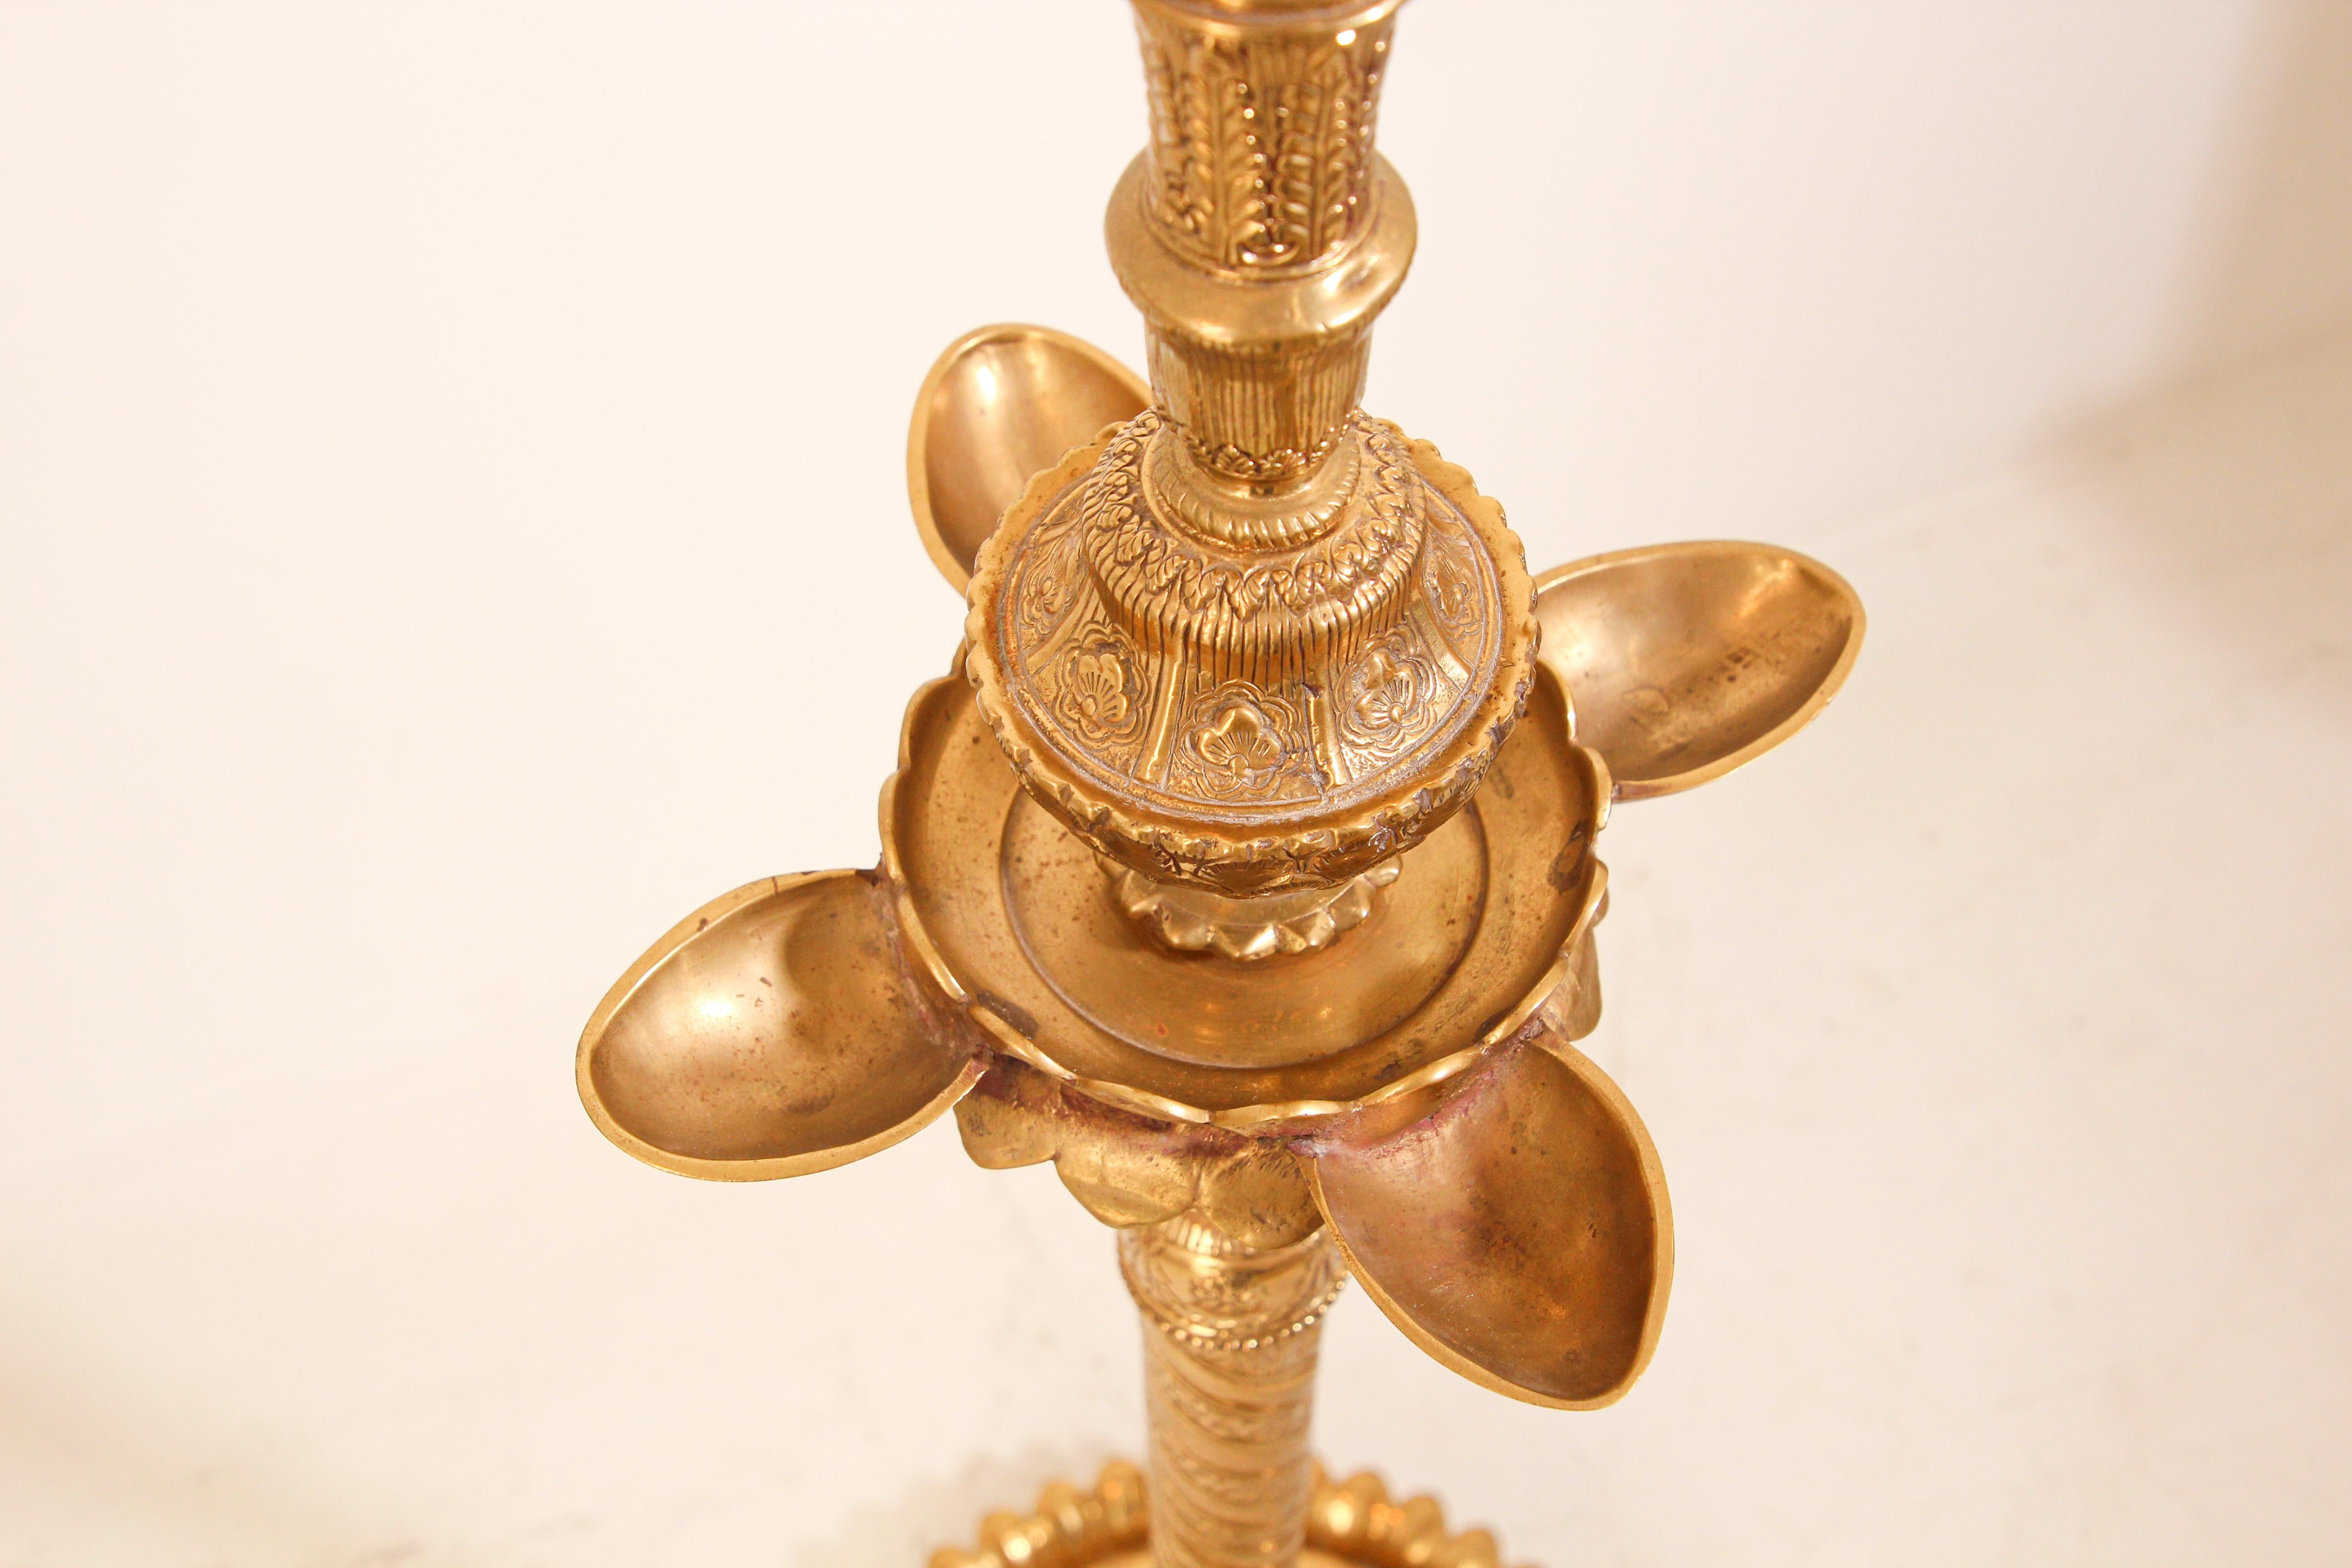 Hand-Crafted Mughal Raj Hindu Indian Brass Temple Oil Lamp